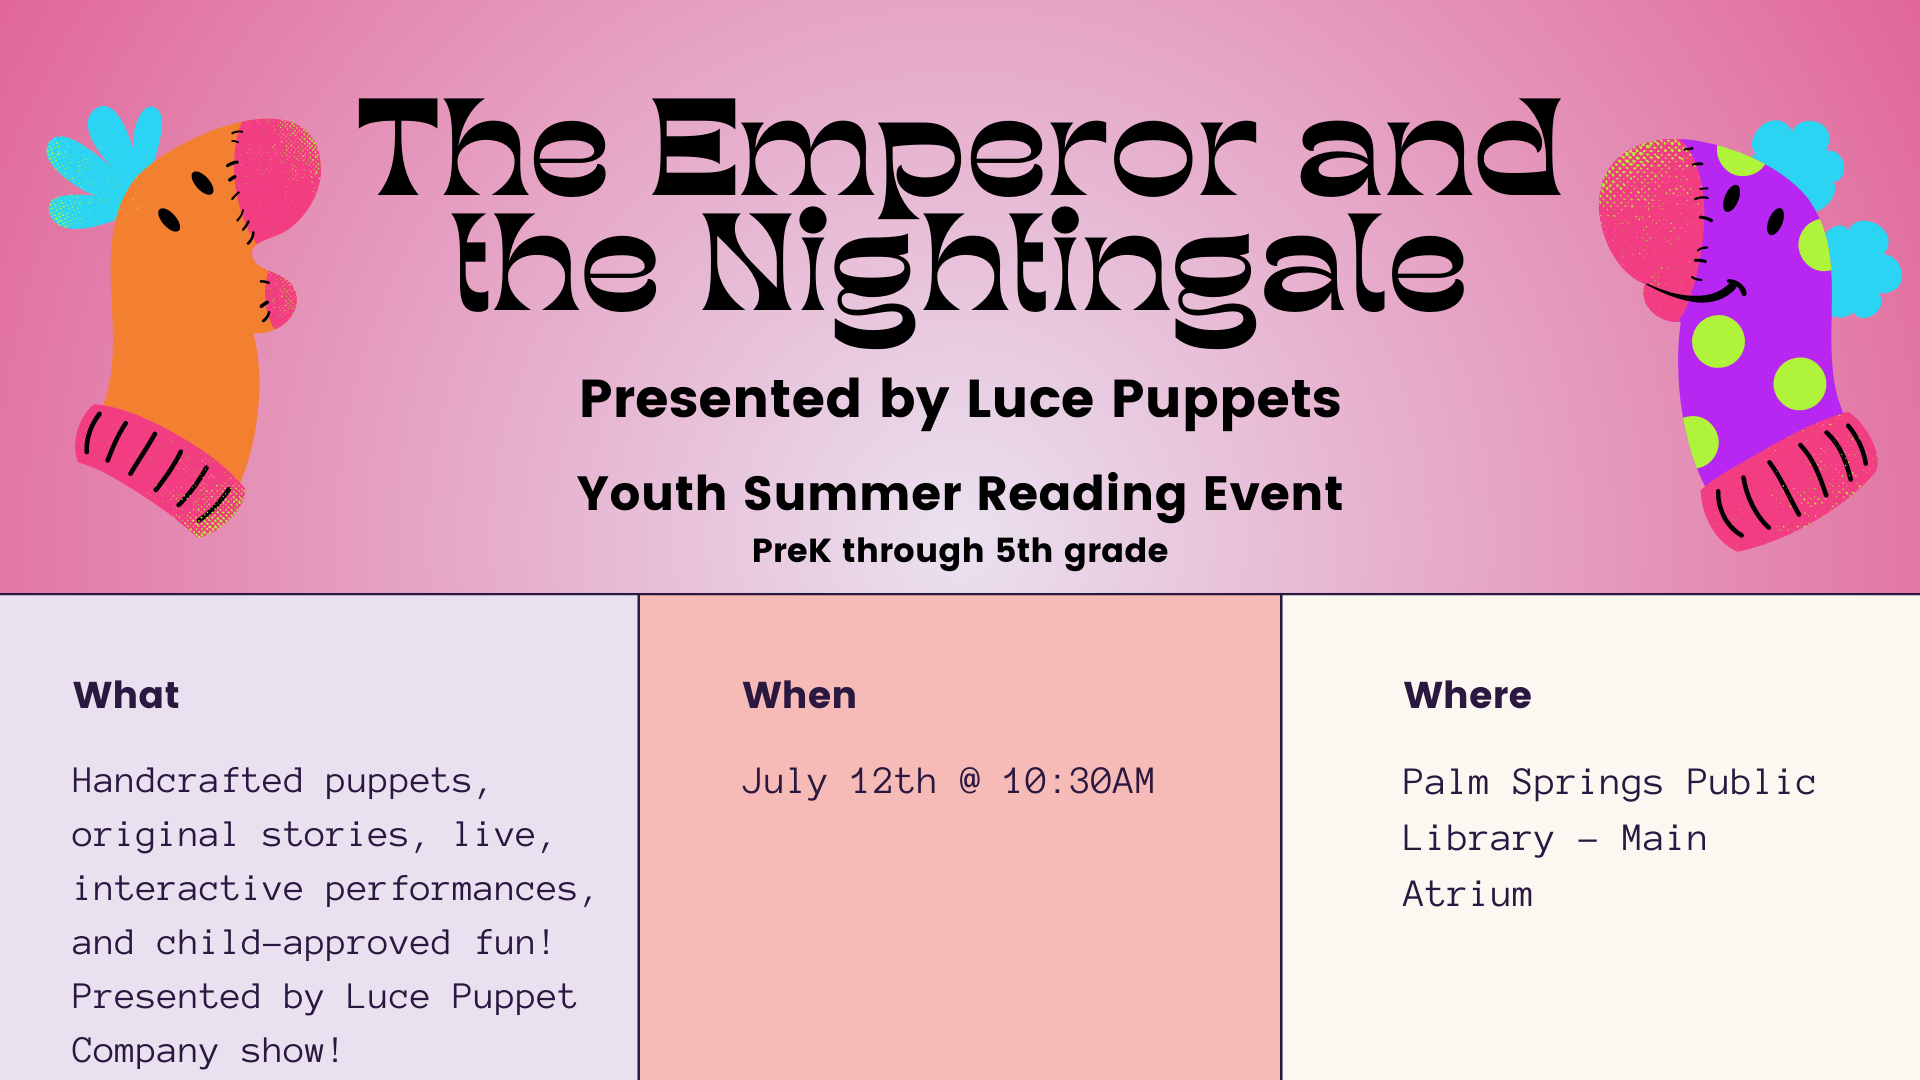 Youth Event: "The Emperor and the Nightingale" by Luce Puppets July 12 10:30 AM    